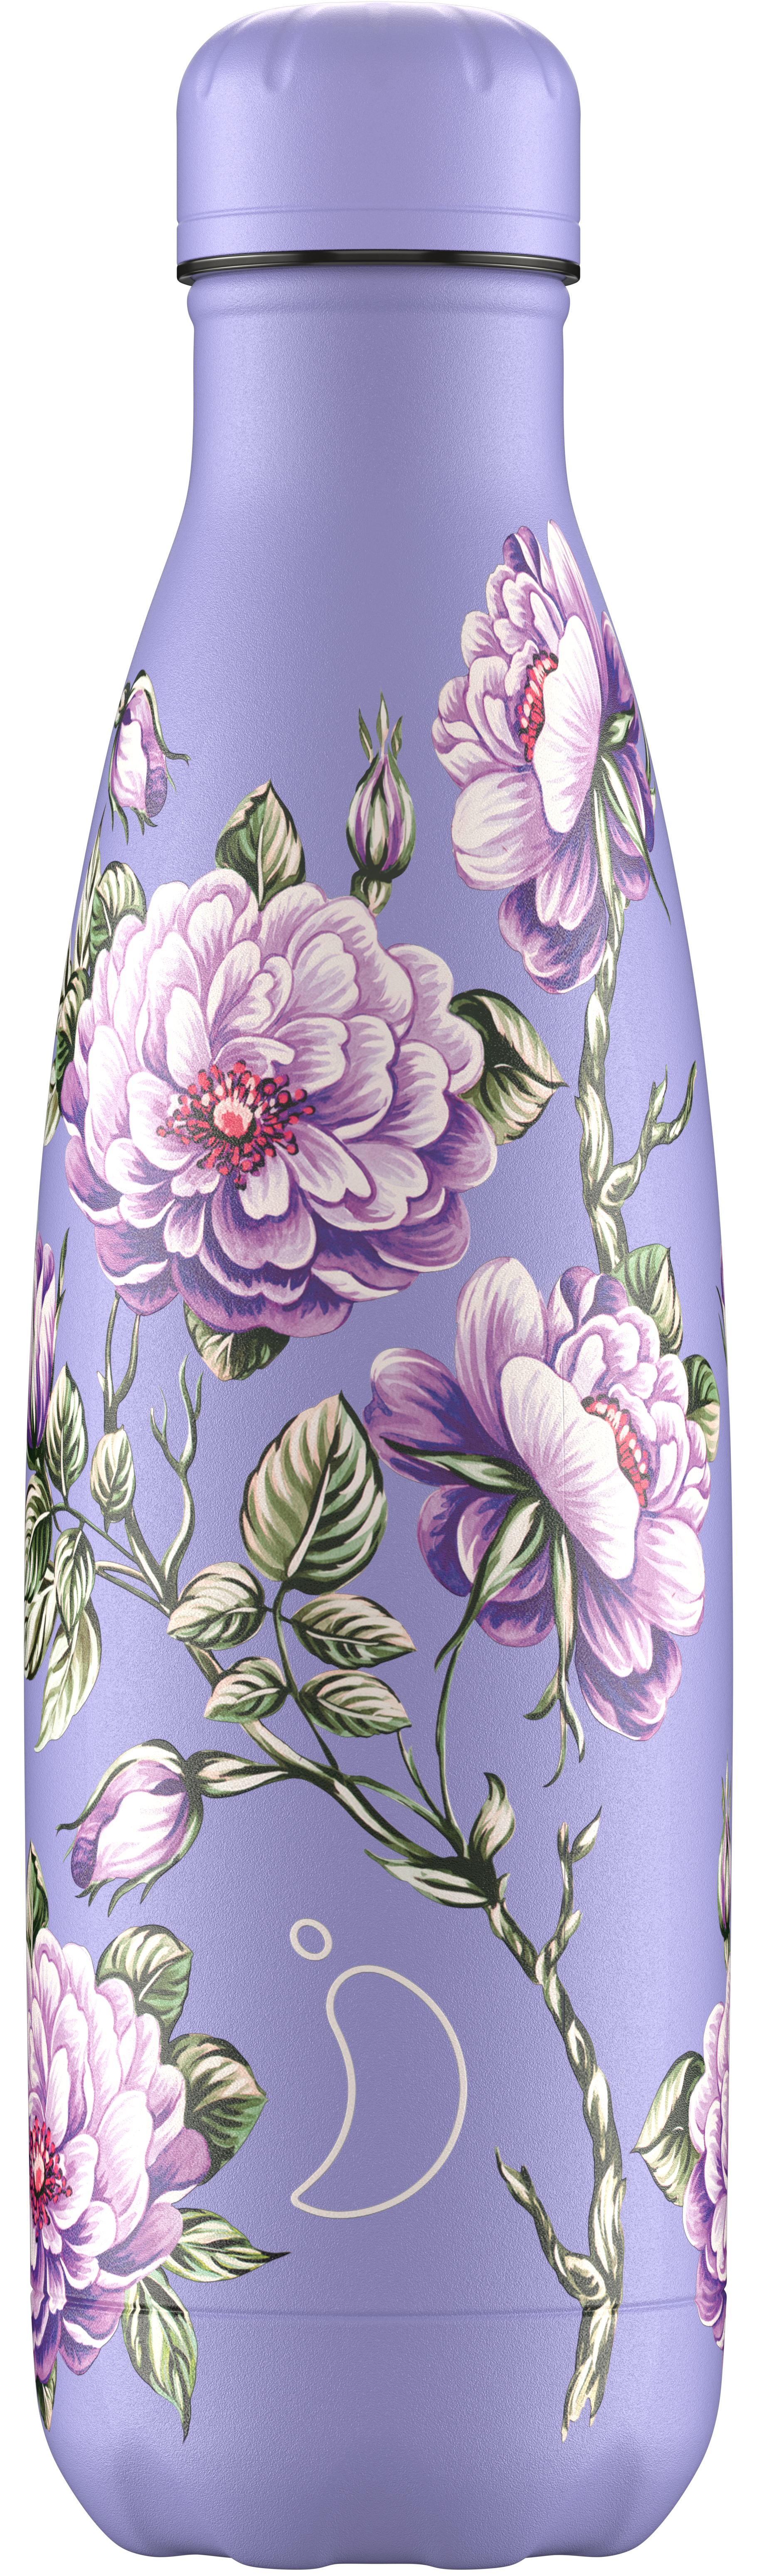 chilly's bottle floral edition 500ml - violet roses